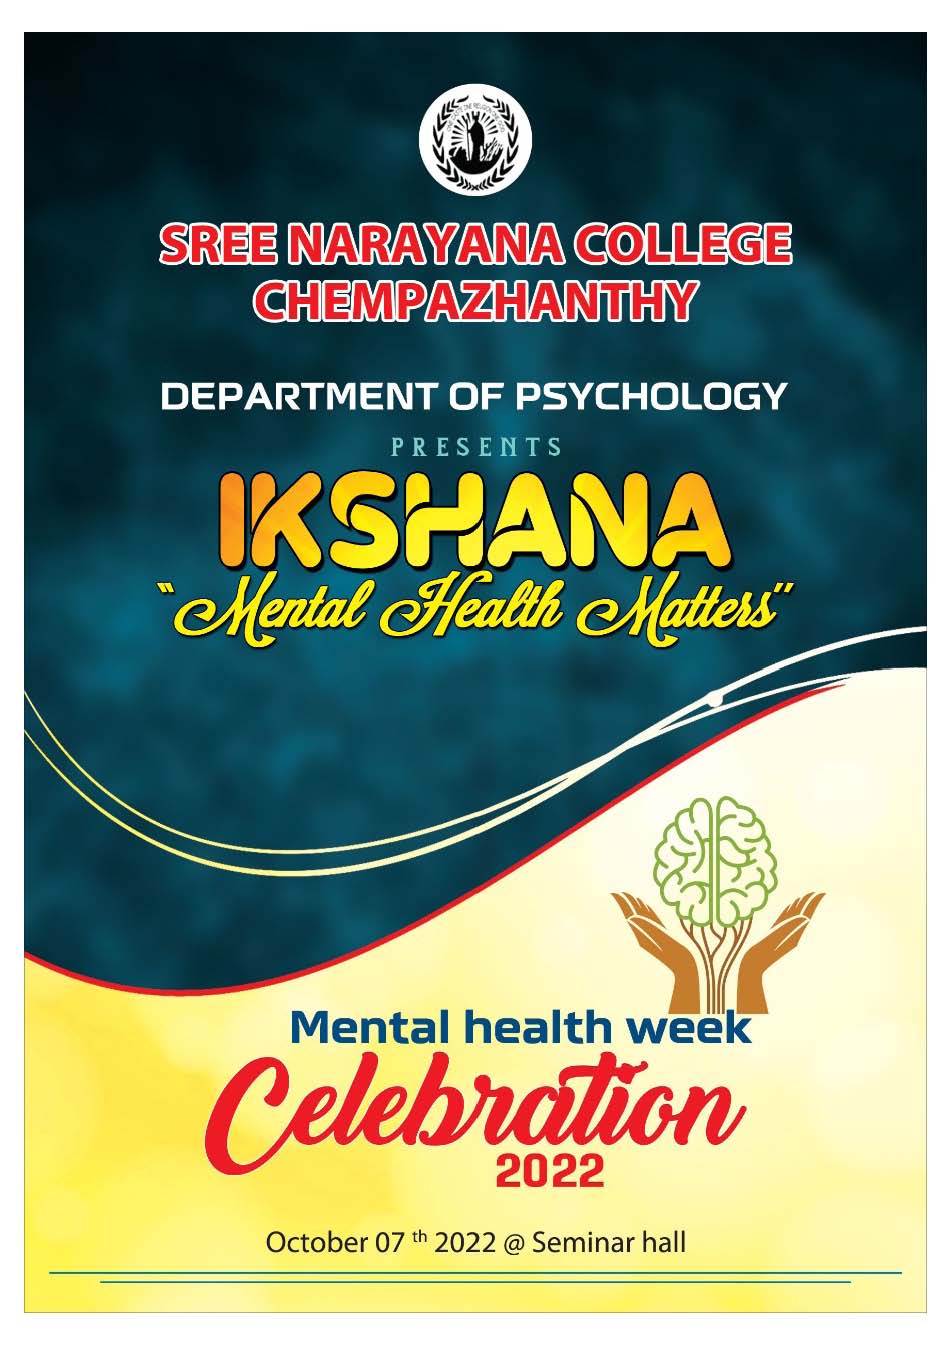 World Mental Health Day Celebration-  Inaugural speech by Dr PT Kurian on October 7, 2022